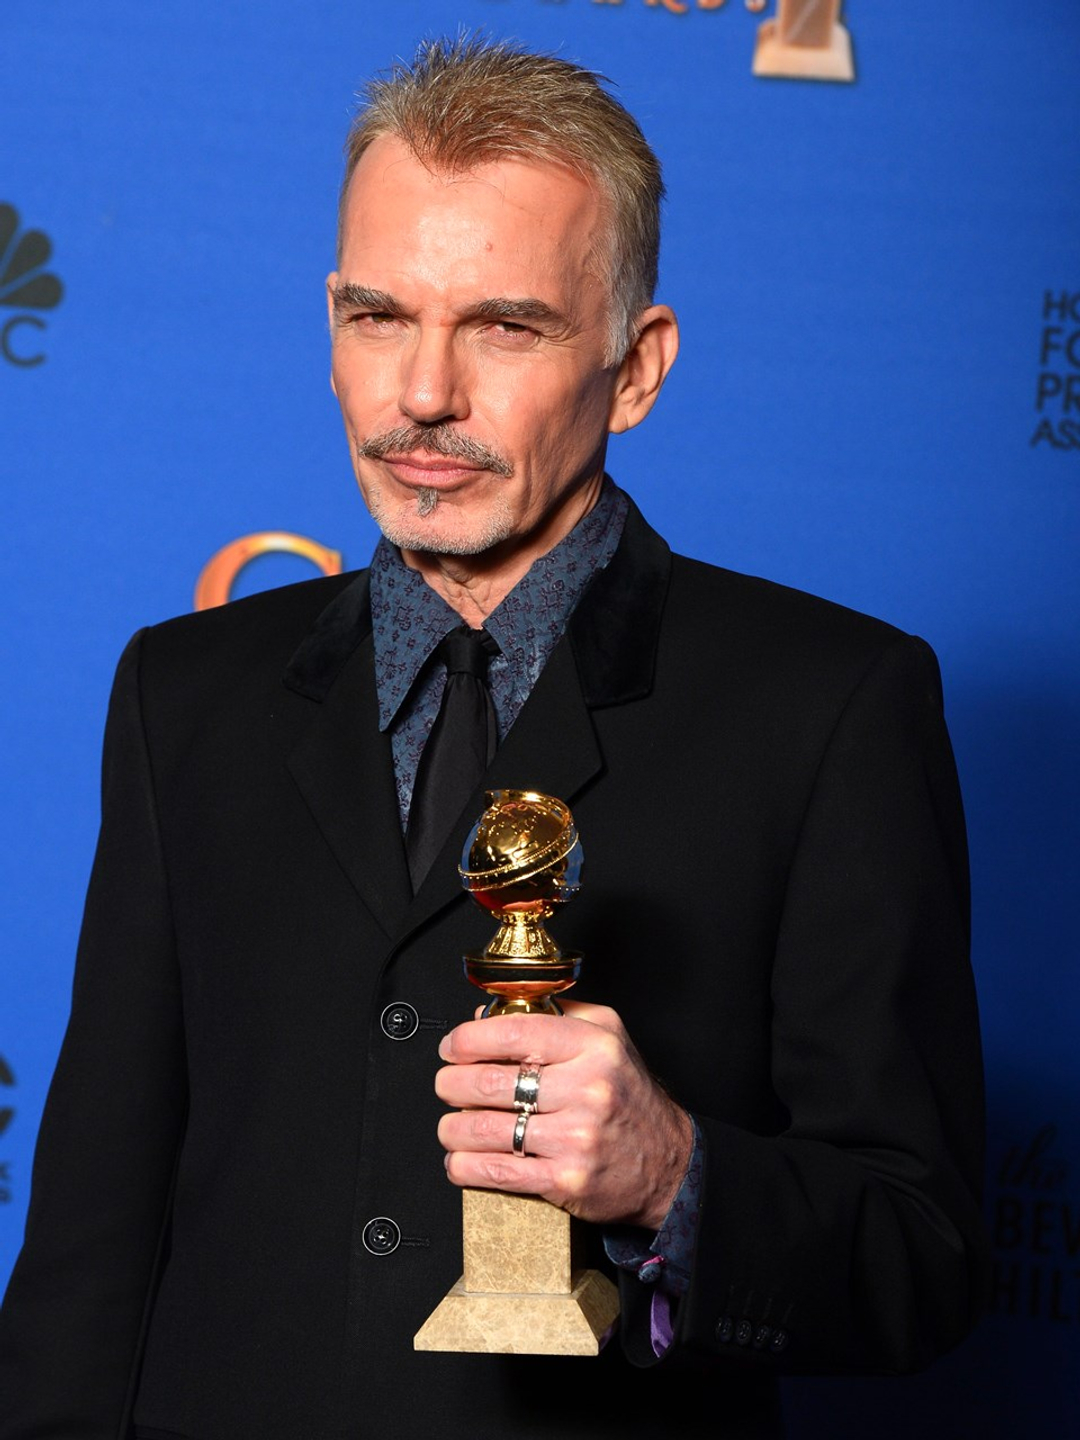 Billy Bob Thornton who is his father